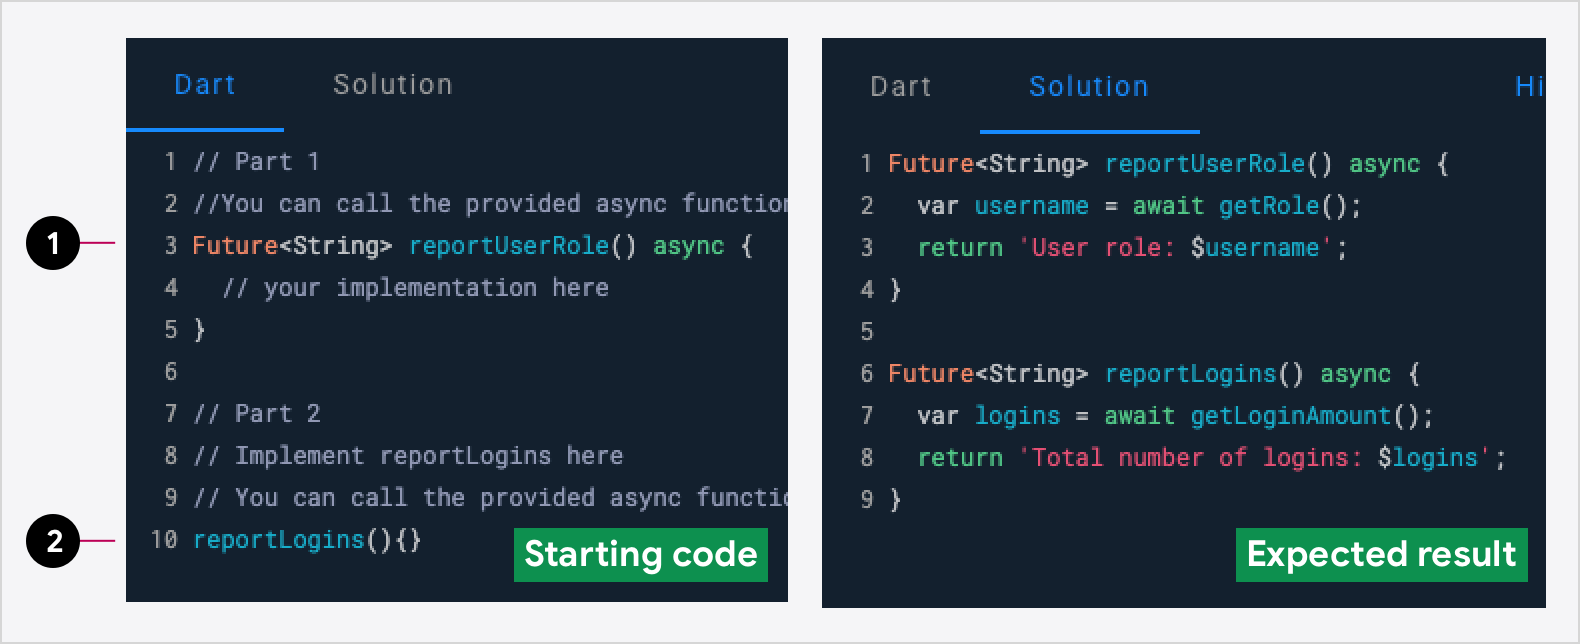 Part 1 has more complete code snippets in the starting state than Part 2 does.